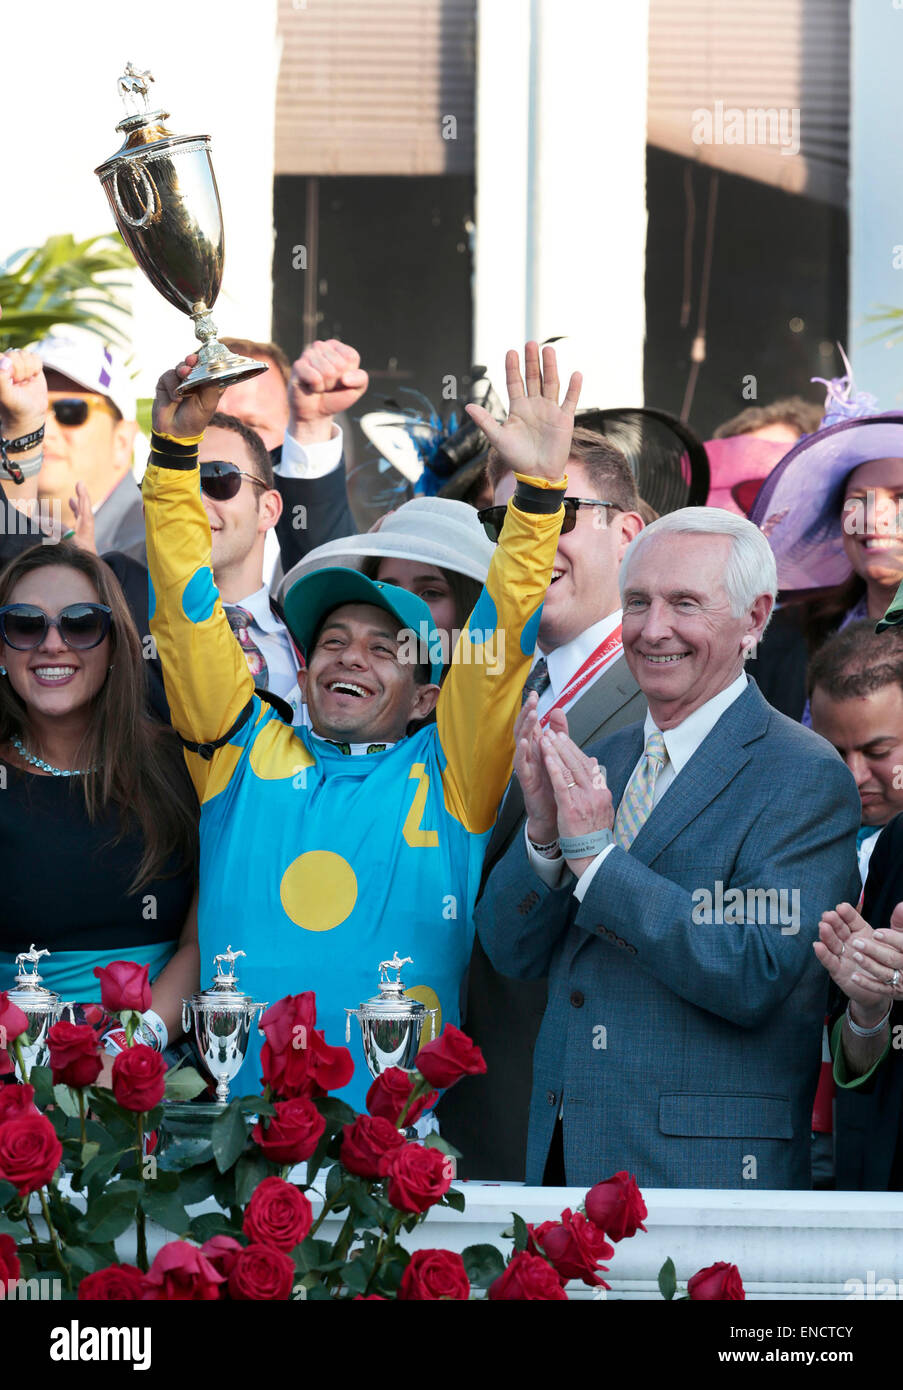 Louisville, Kentucky, USA. 2nd May, 2015. VICTOR ESPINOZA, with Kentucky Governor STEVE BESHEAR on the right, holds up the trophy in the winner's circle after winning the 141st running of the Kentucky Derby aboard American Pharaoh at Churchill Downs. Credit:  Lexington Herald-Leader/ZUMA Wire/Alamy Live News Stock Photo